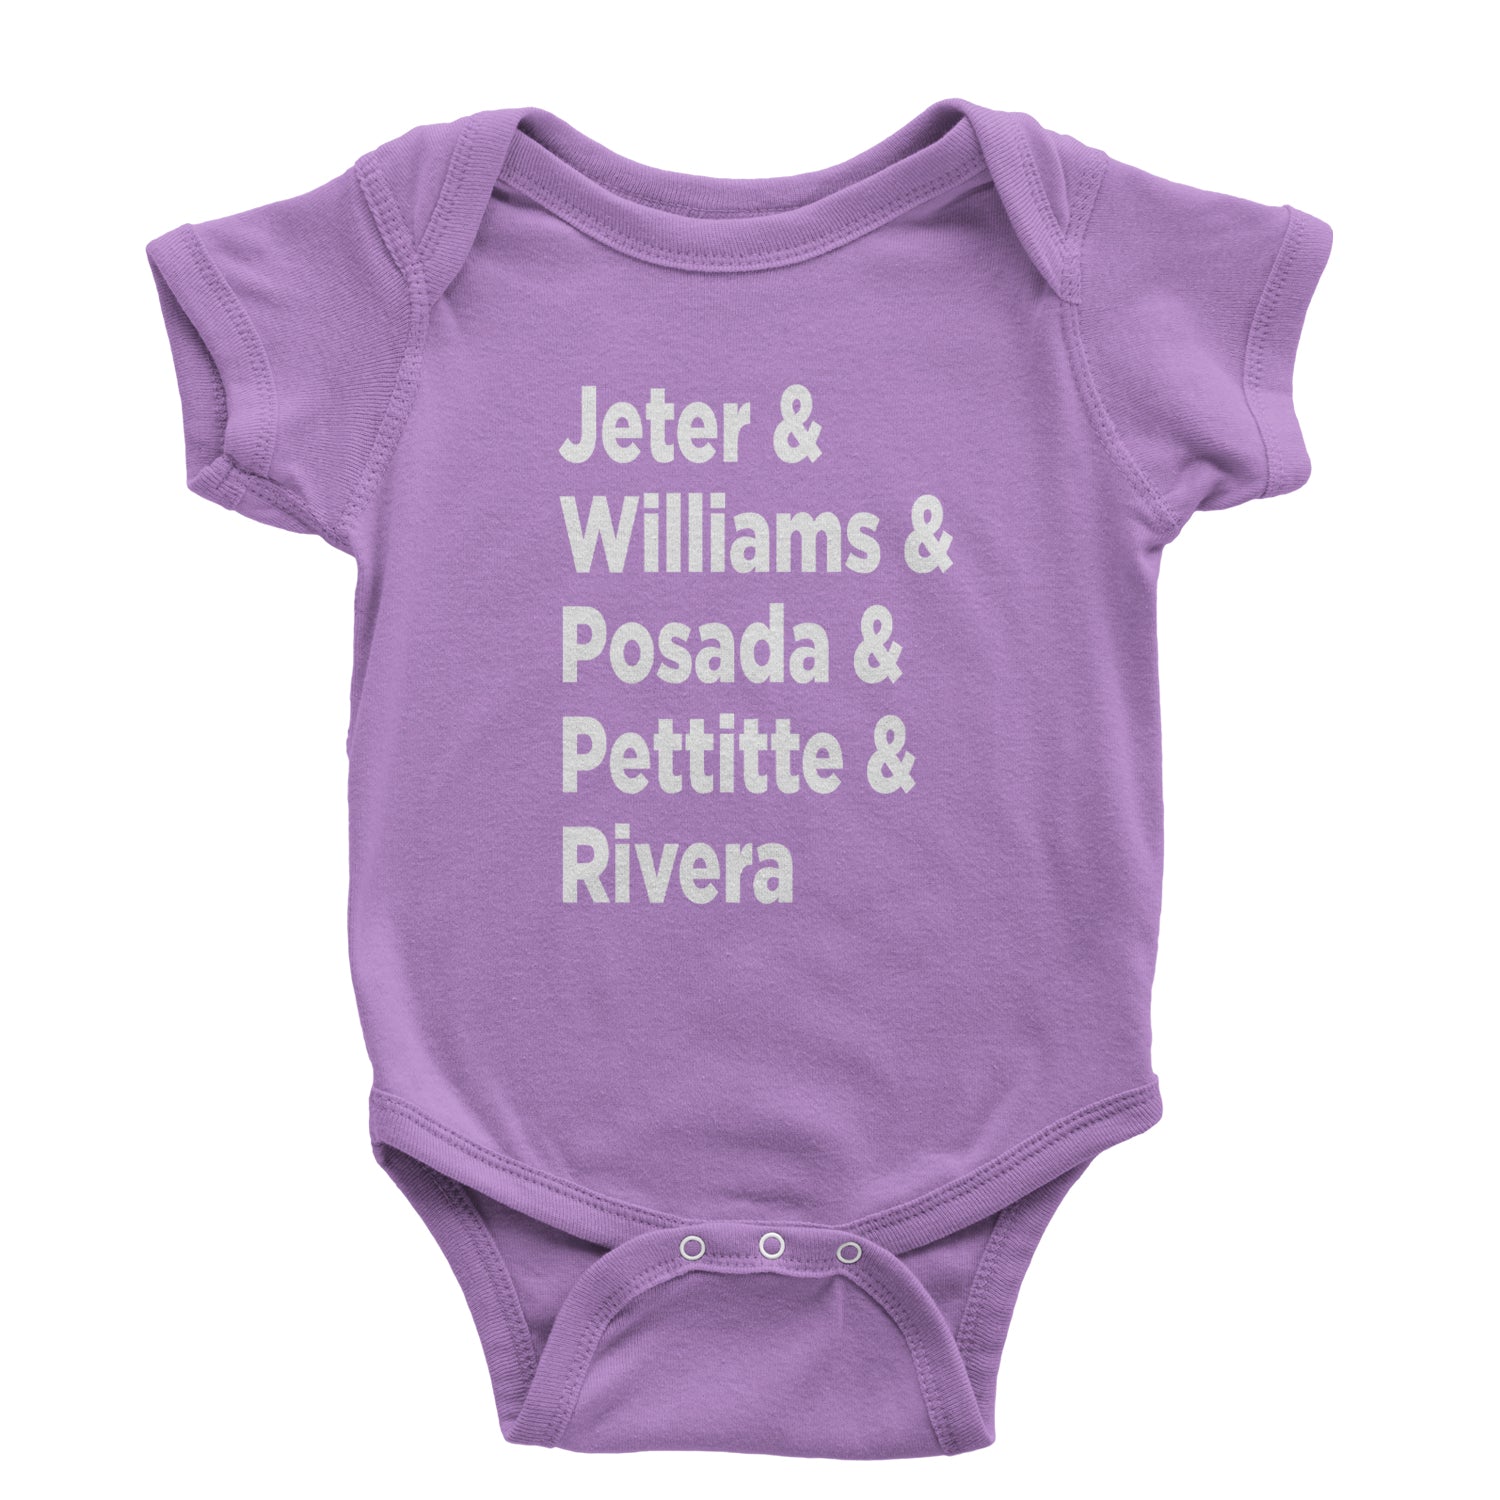 Jeter and Williams and Posada and Pettitte and Rivera Infant One-Piece Romper Bodysuit and Toddler T-shirt baseball, comes, here, judge, the by Expression Tees